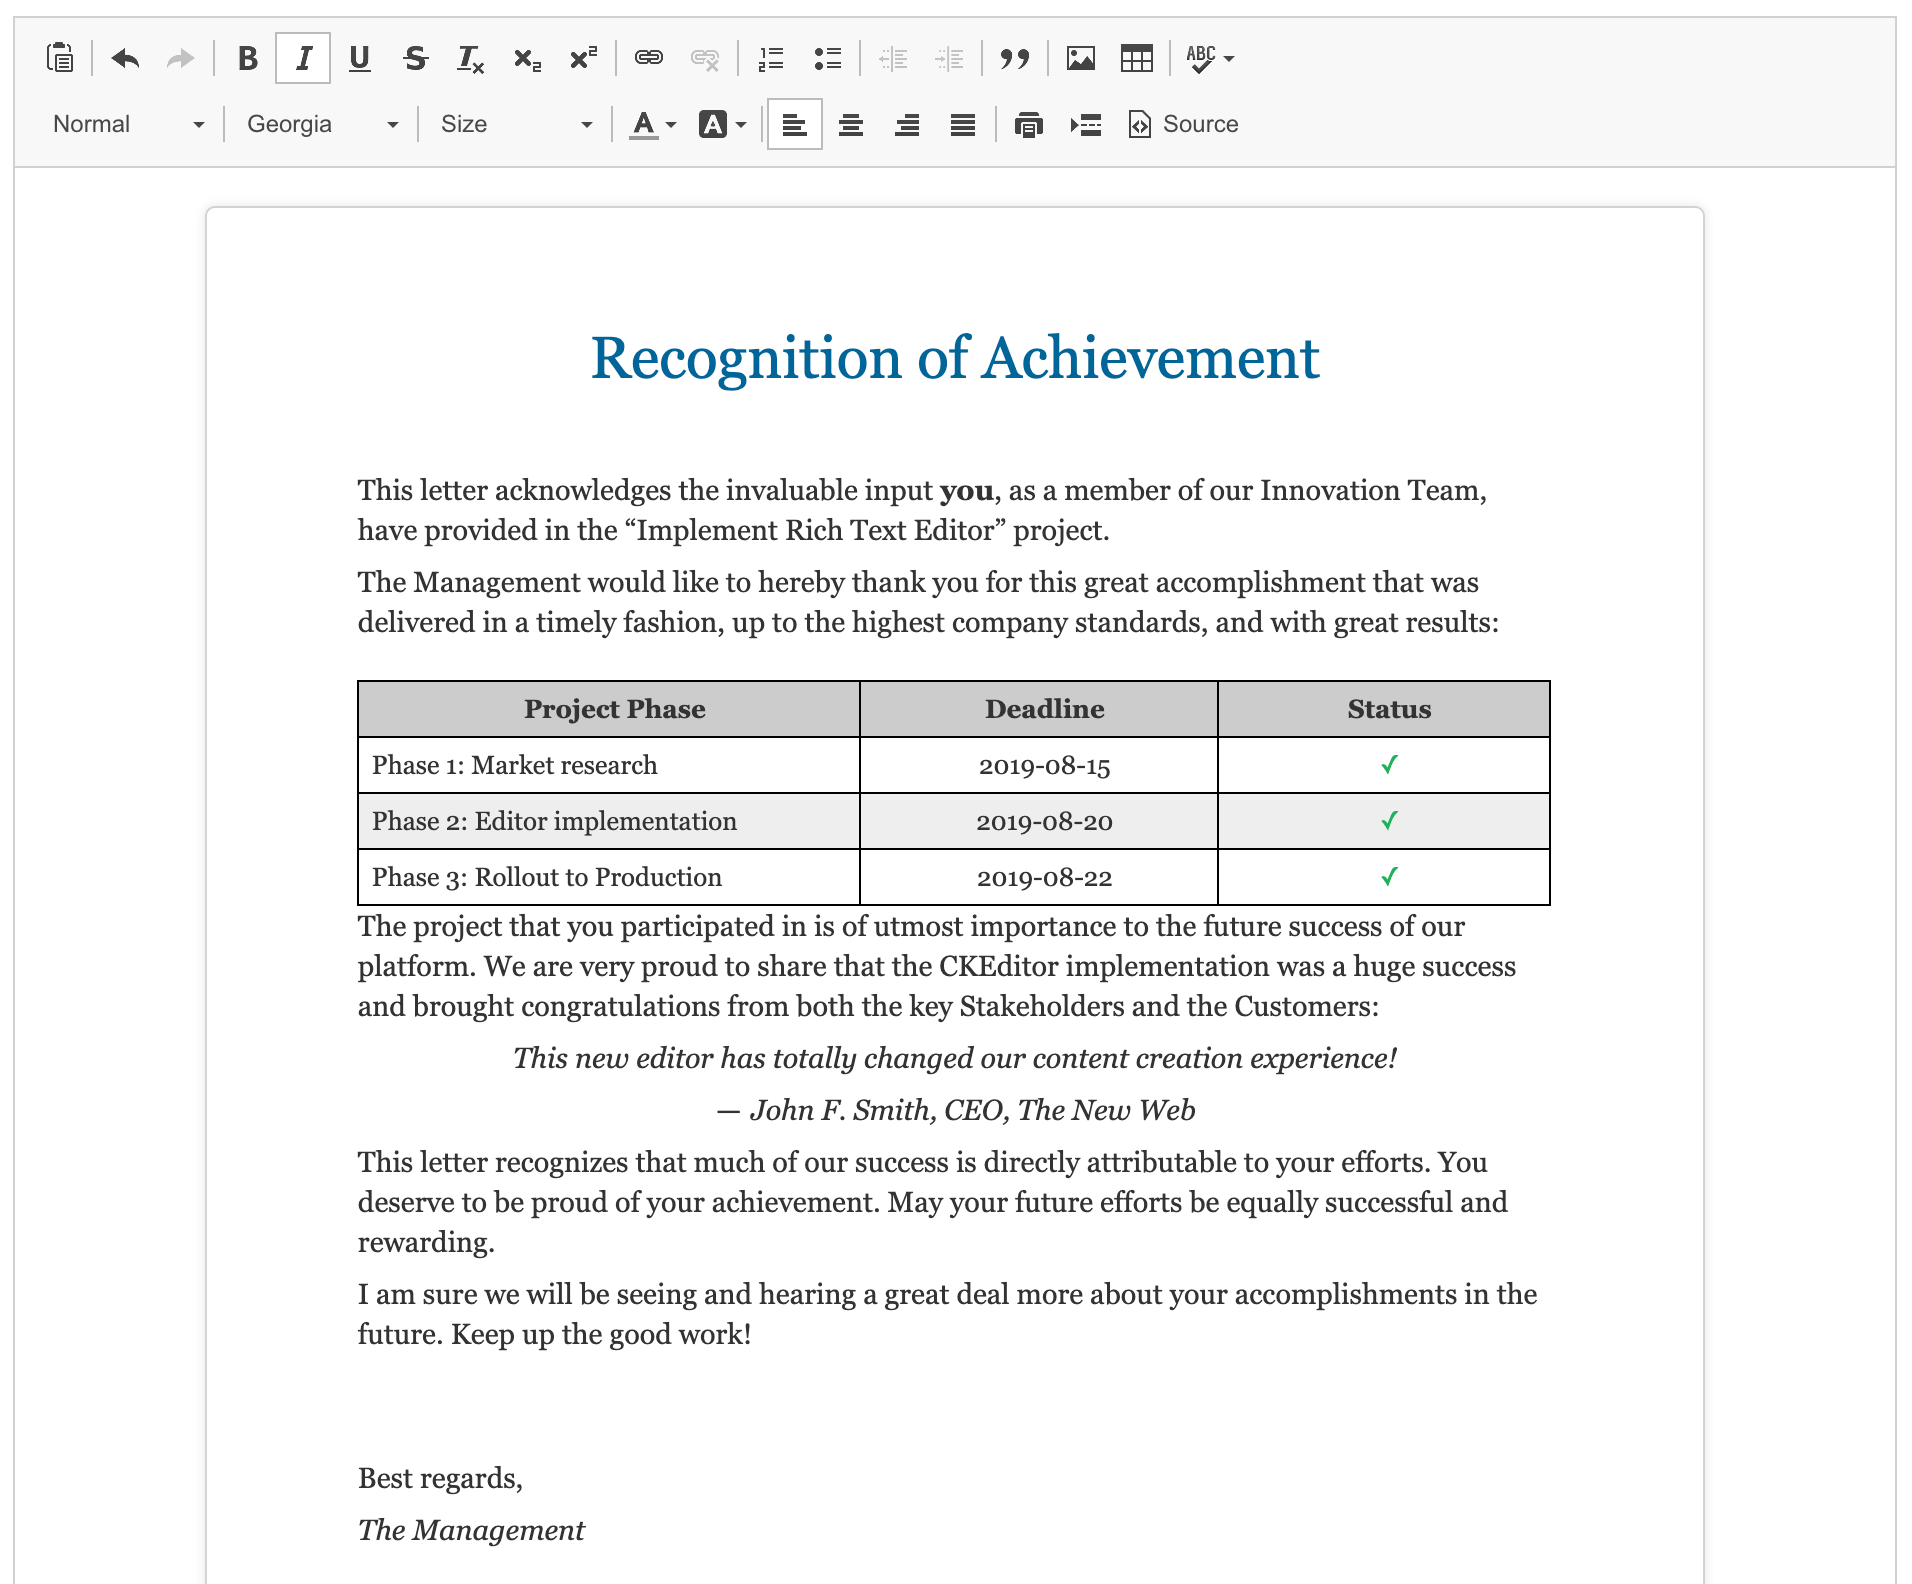 LibreOffice Writer content pasted into CKEditor 4 WYSIWYG editor.